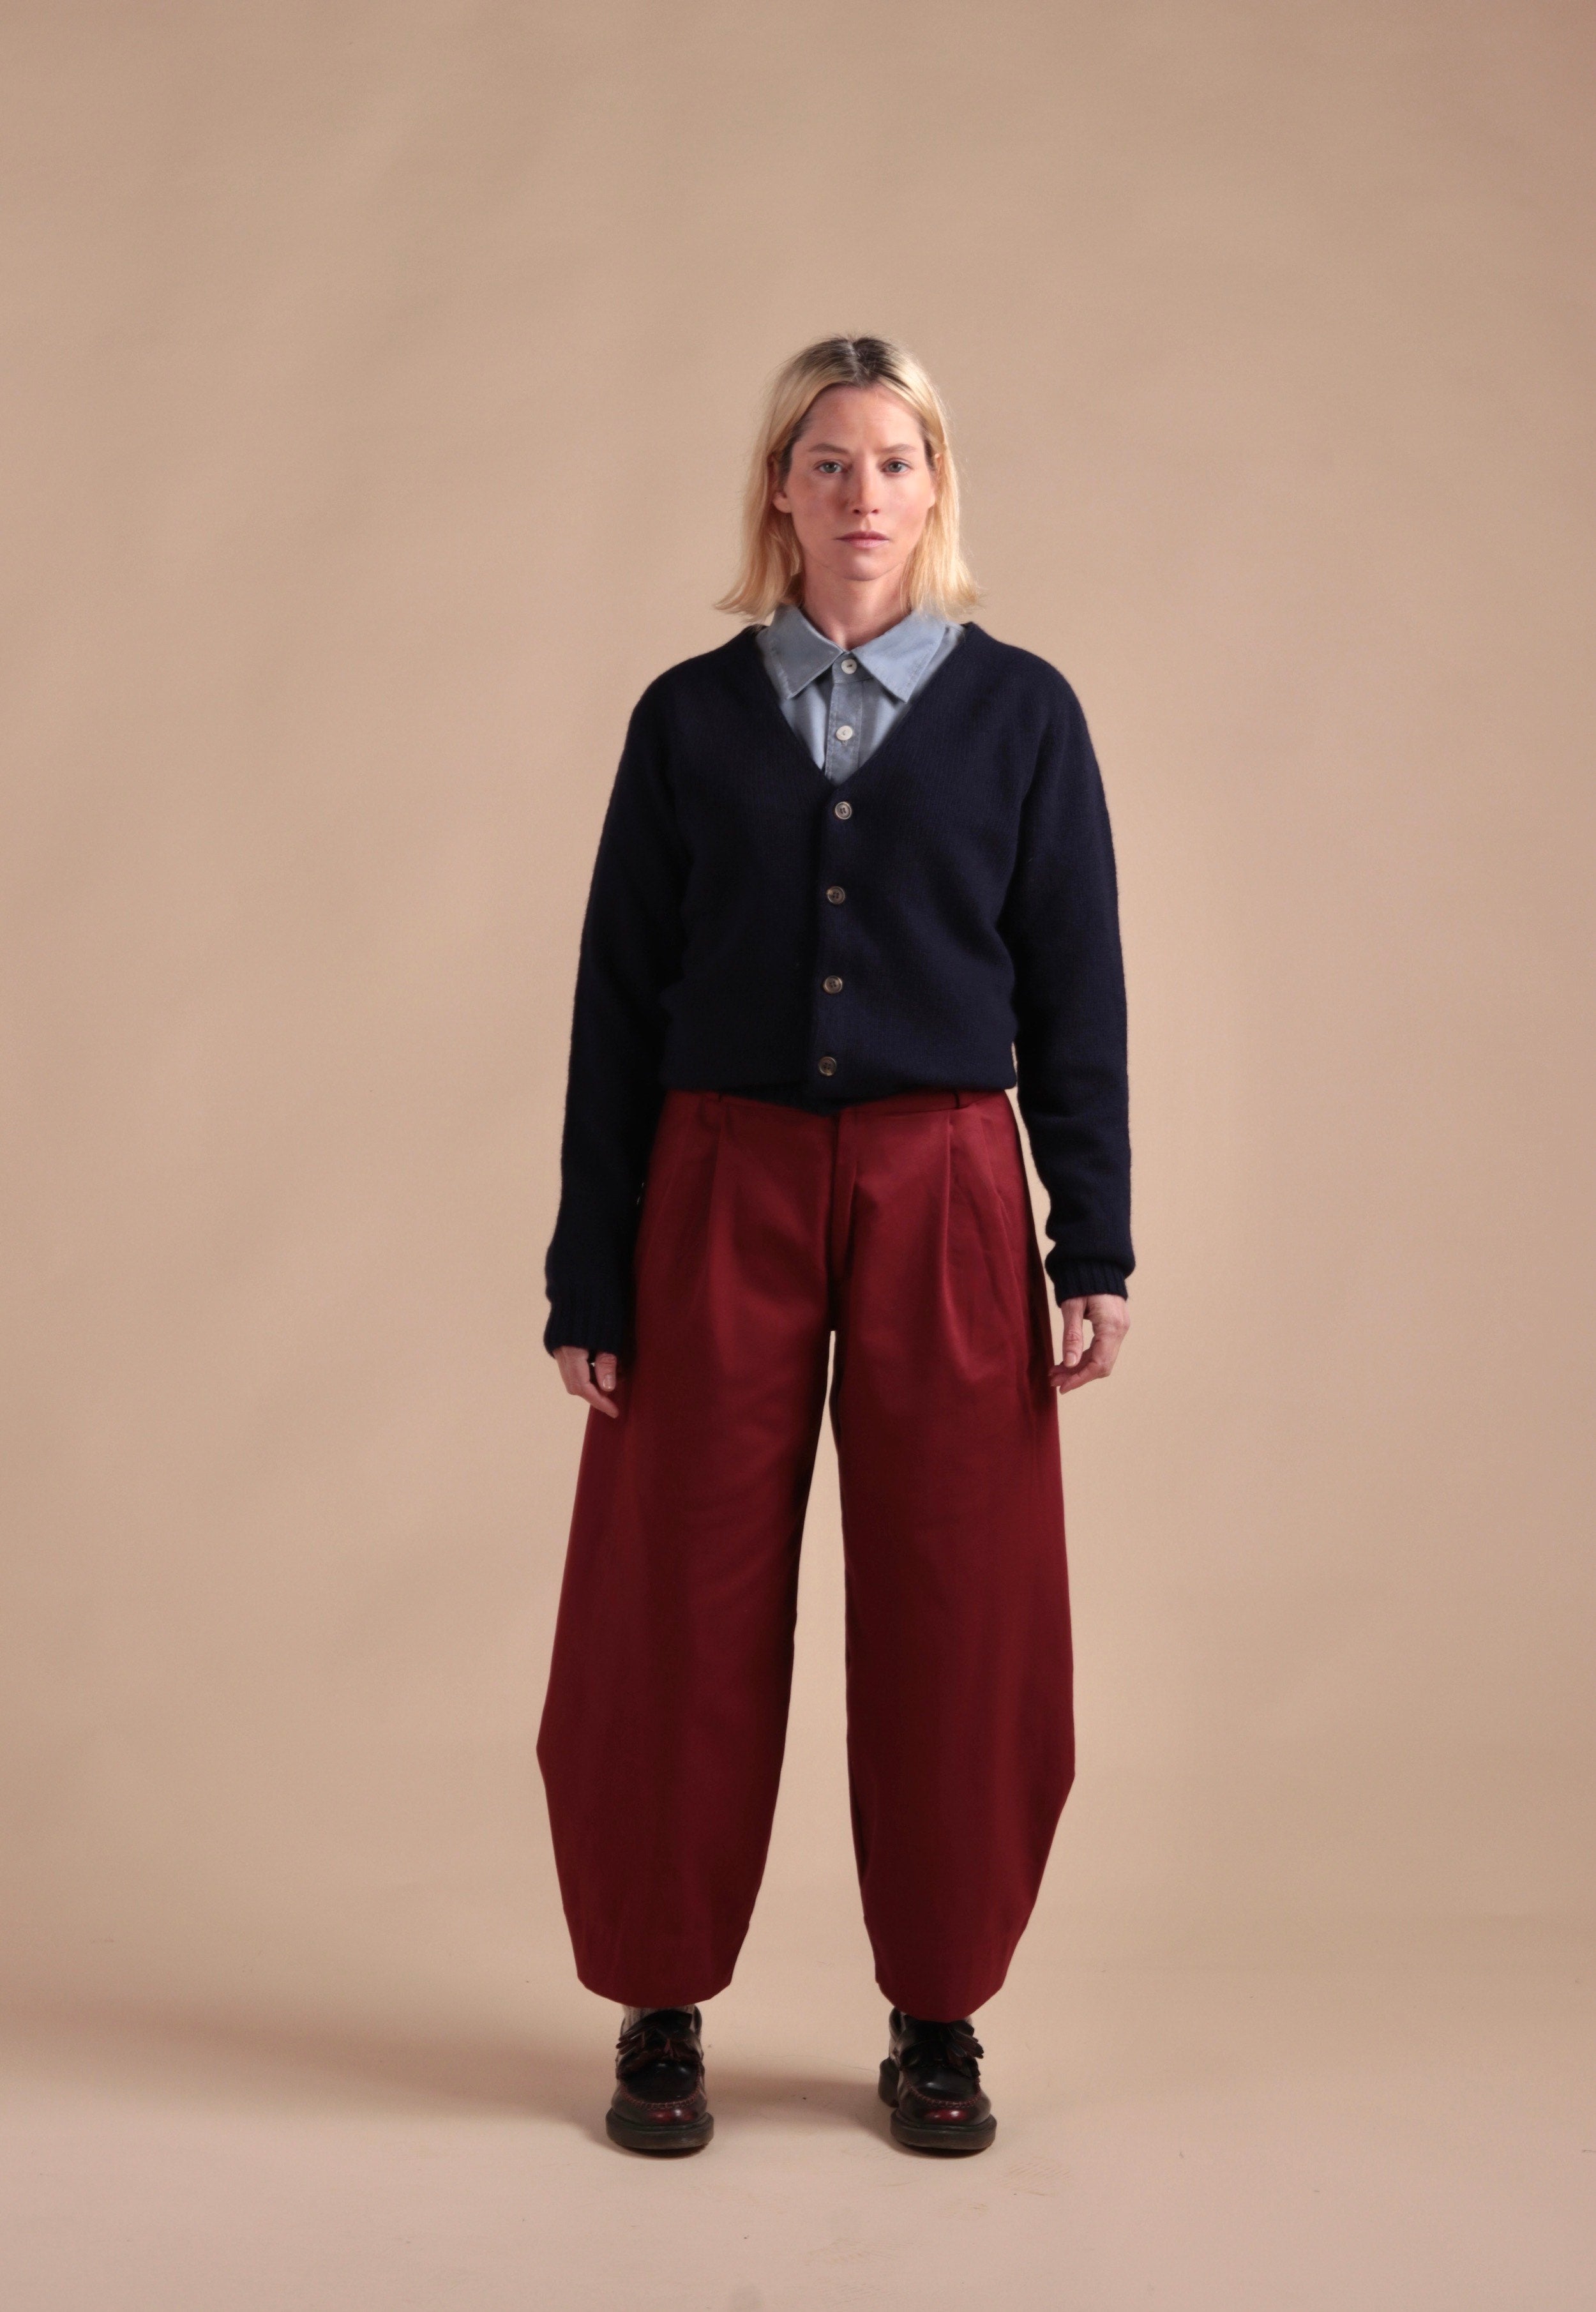 Sienna wears Carrier Company Dutch Trouser in Breton red with and Navy Cardigan